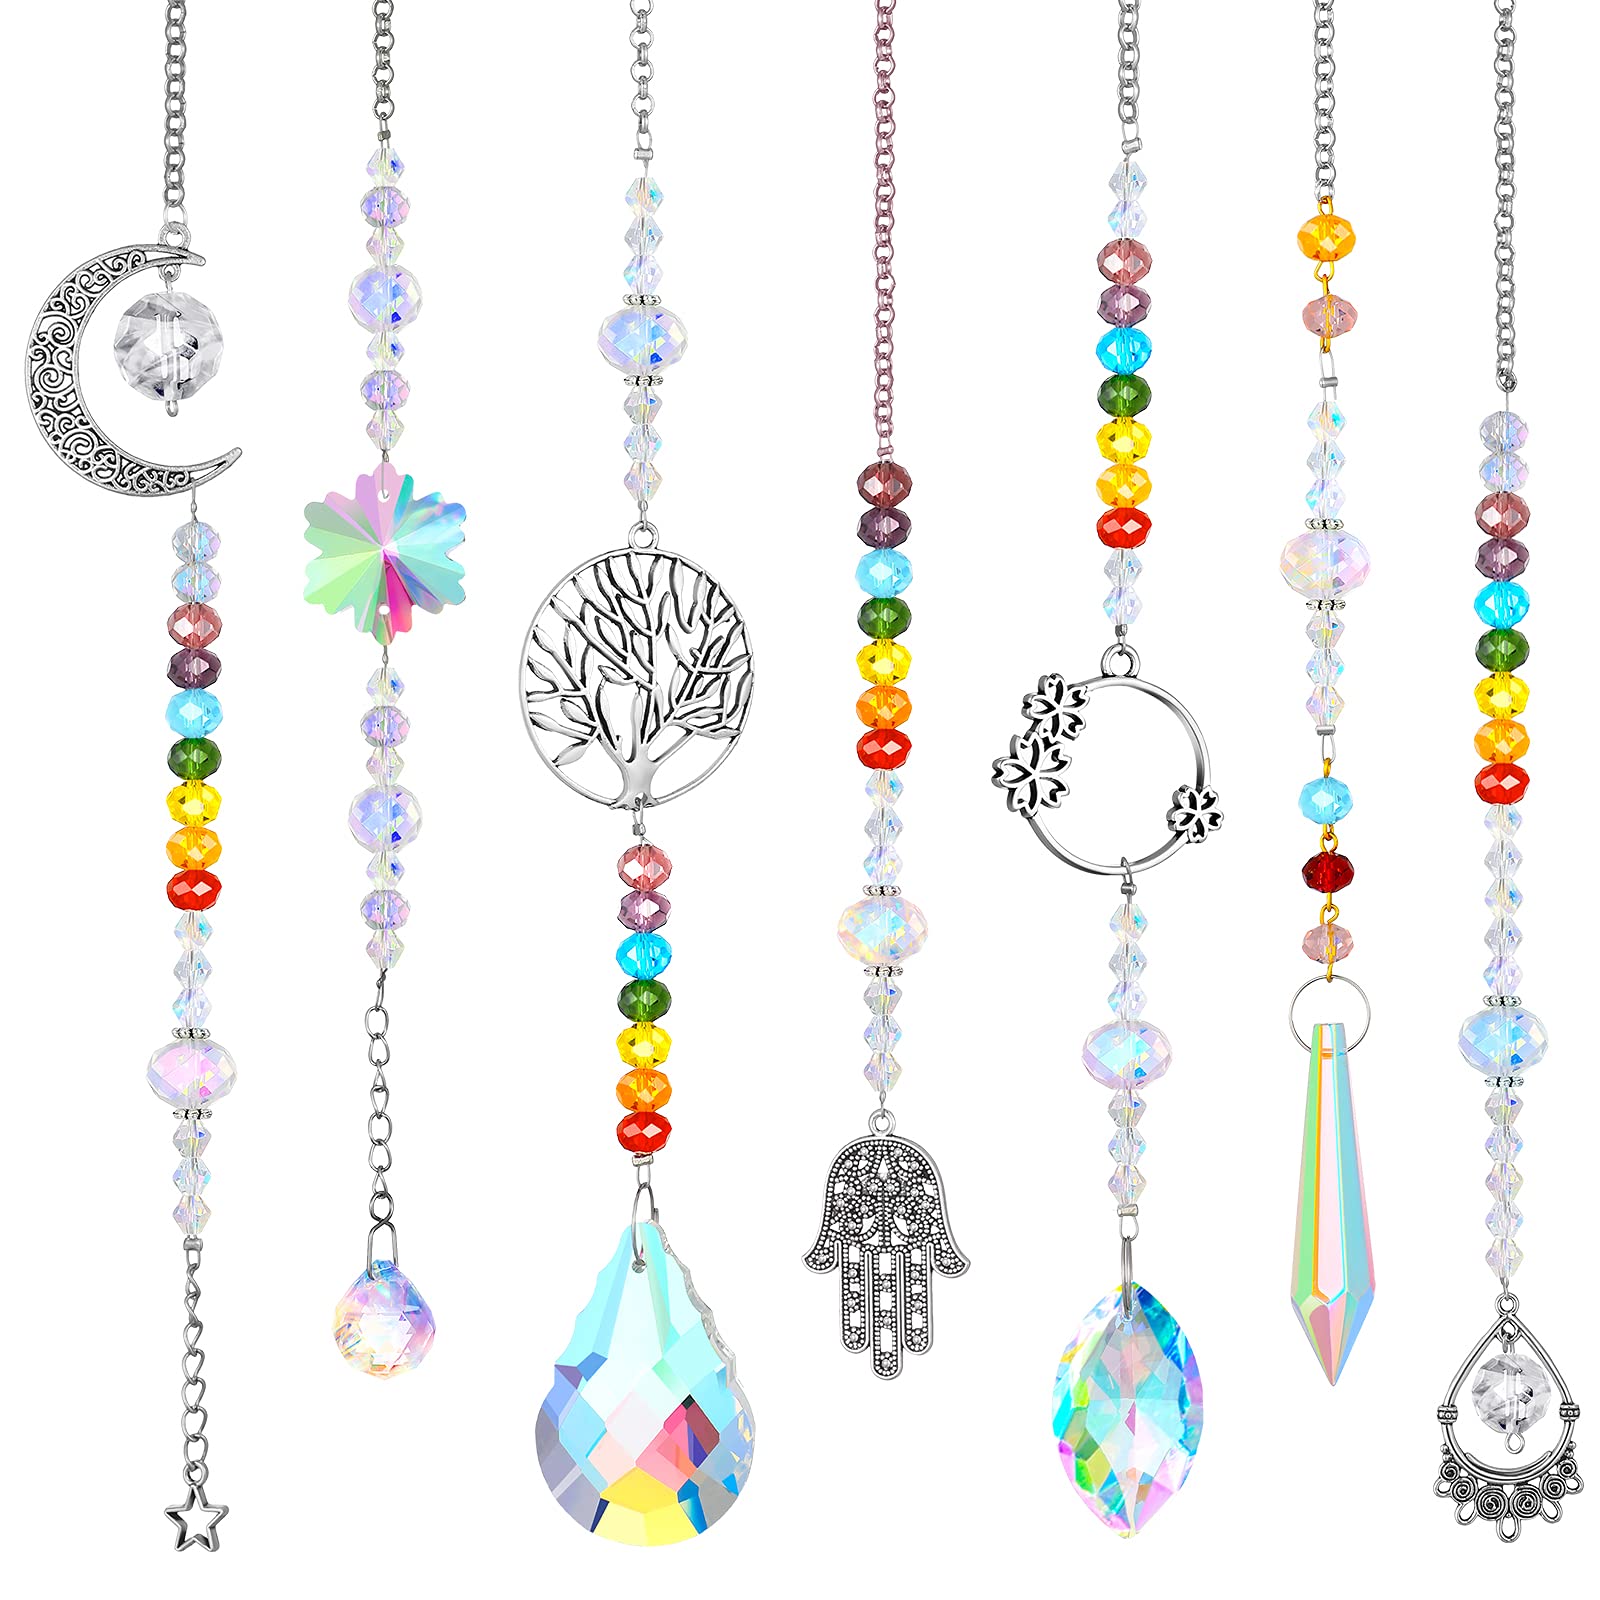 7 Pieces Sun Catcher Crystals Colorful Hanging Prism Suncatcher Window Ornament Beads Chain Sphere Chandelier Pendants for Home Wedding Gifts Decoration (Fresh)